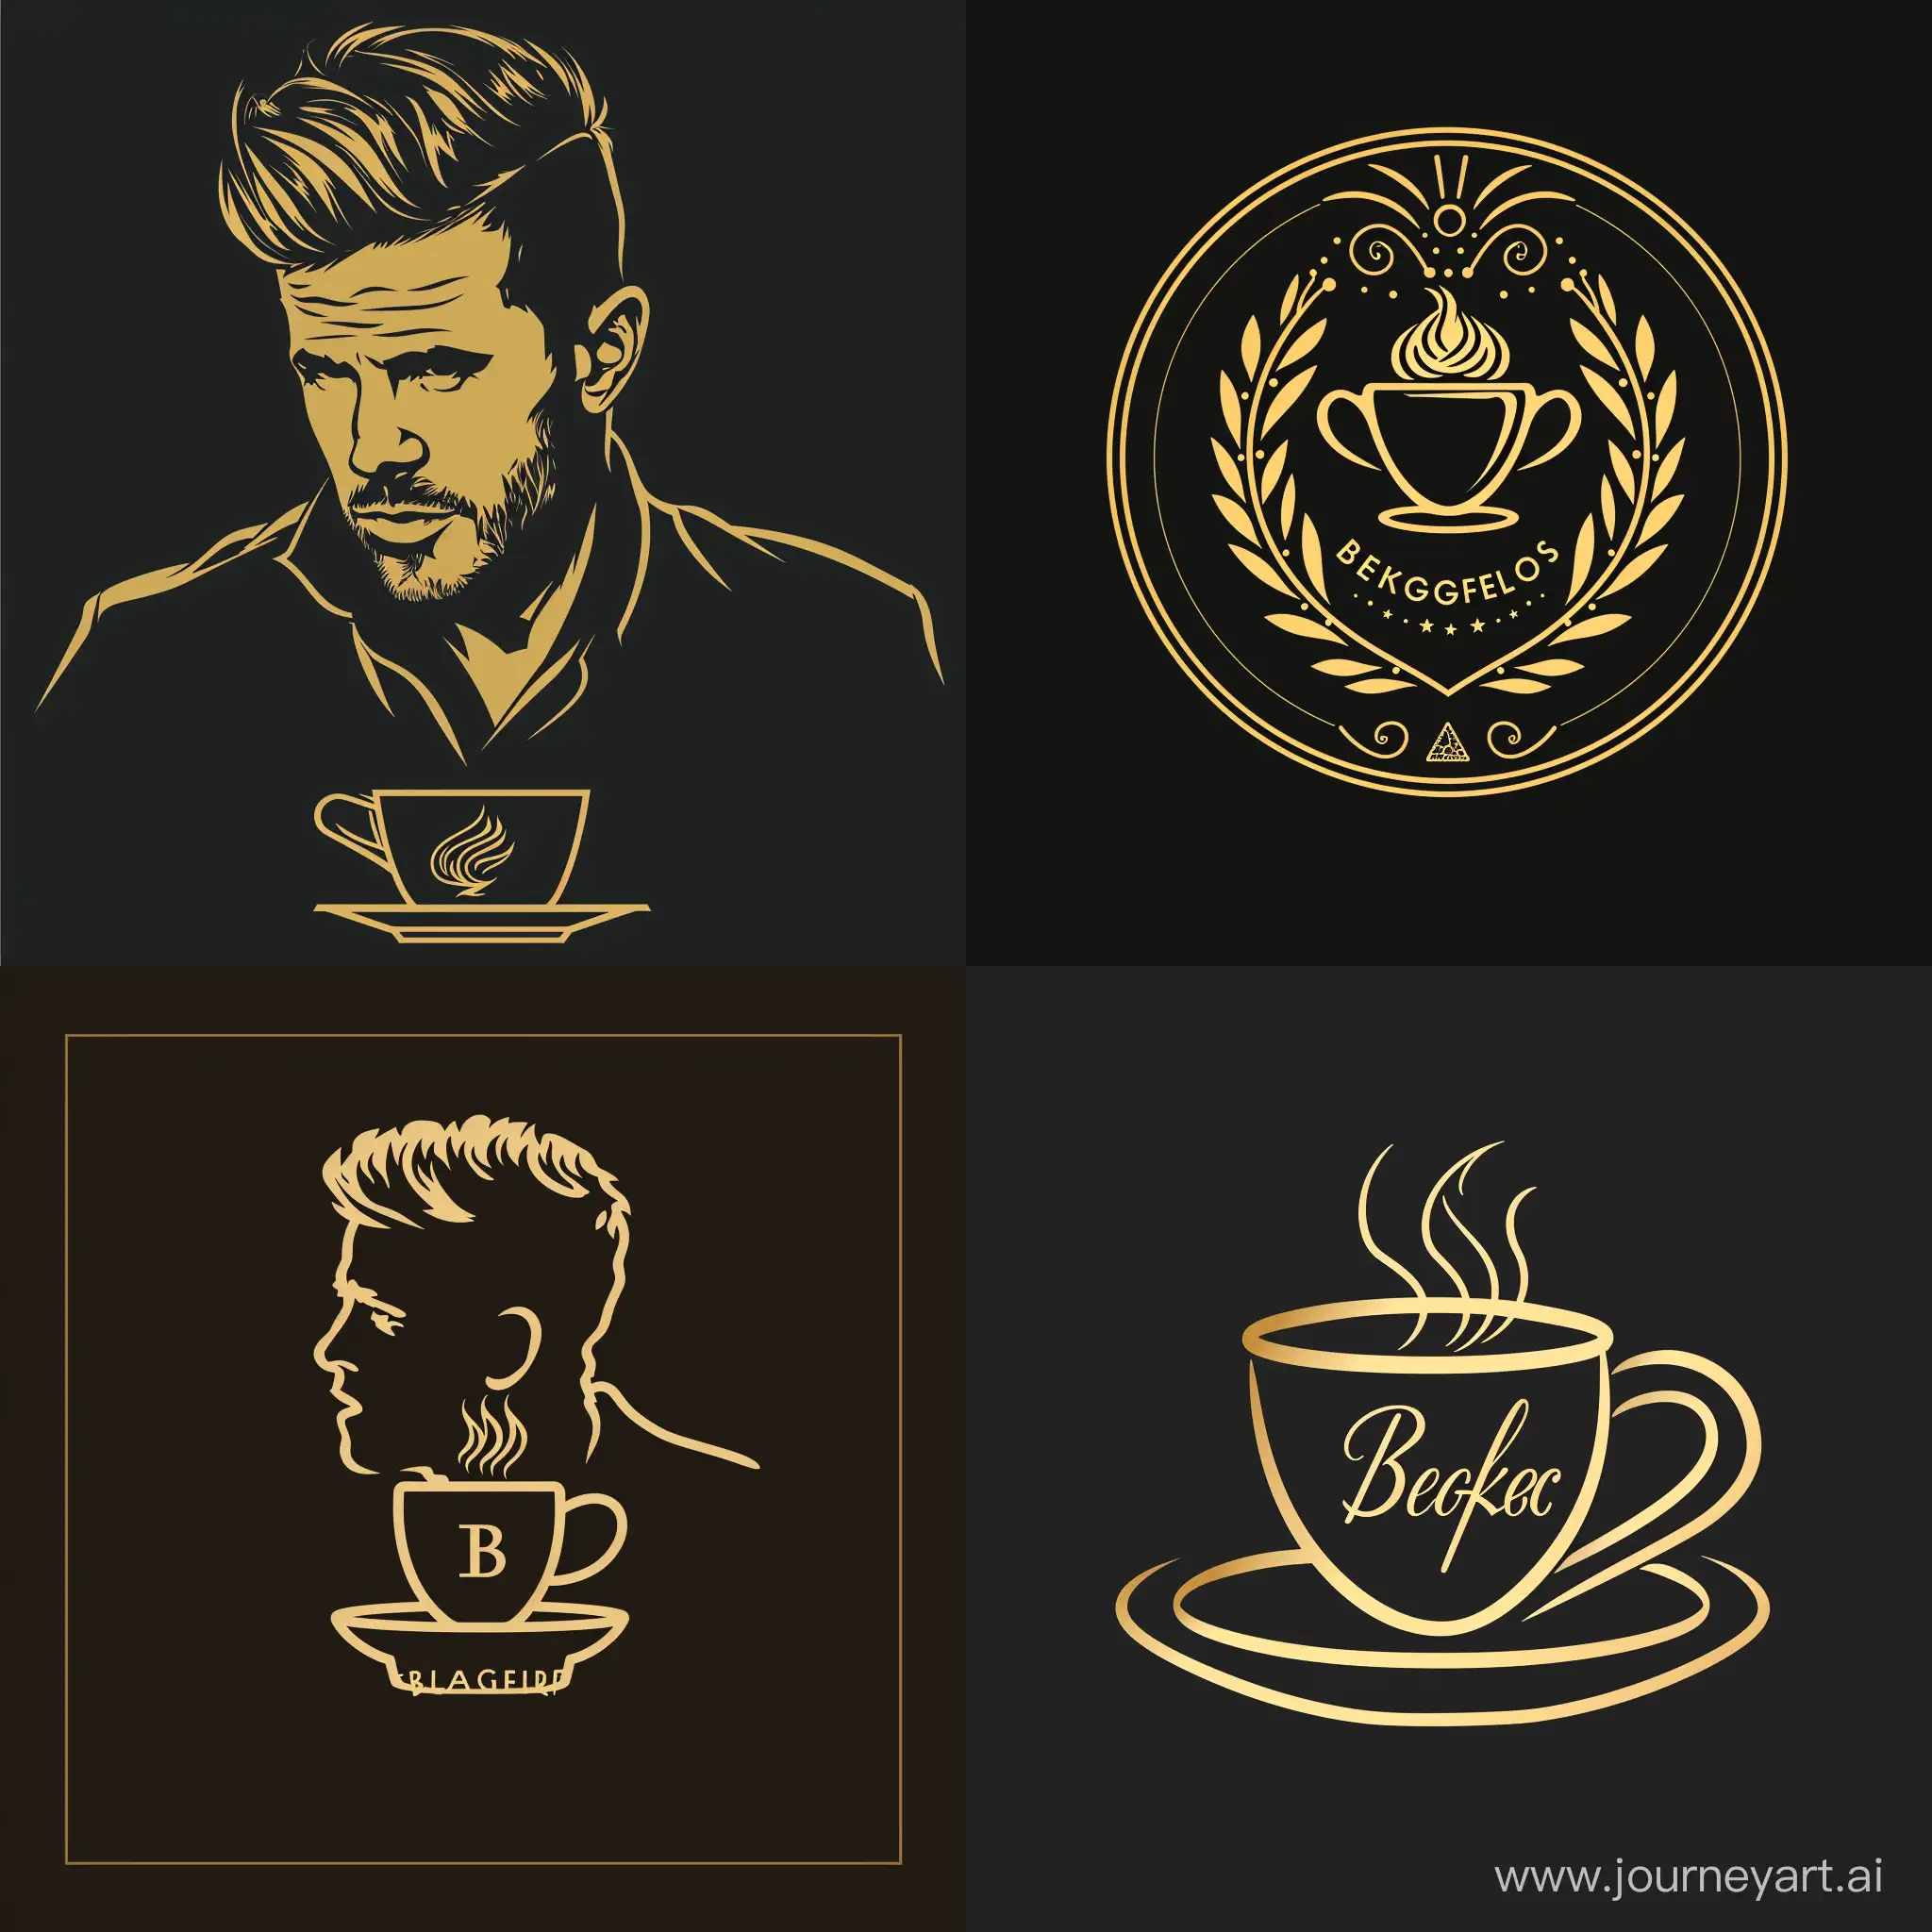 A special logo with Beckham's name should be golden for the coffee shop